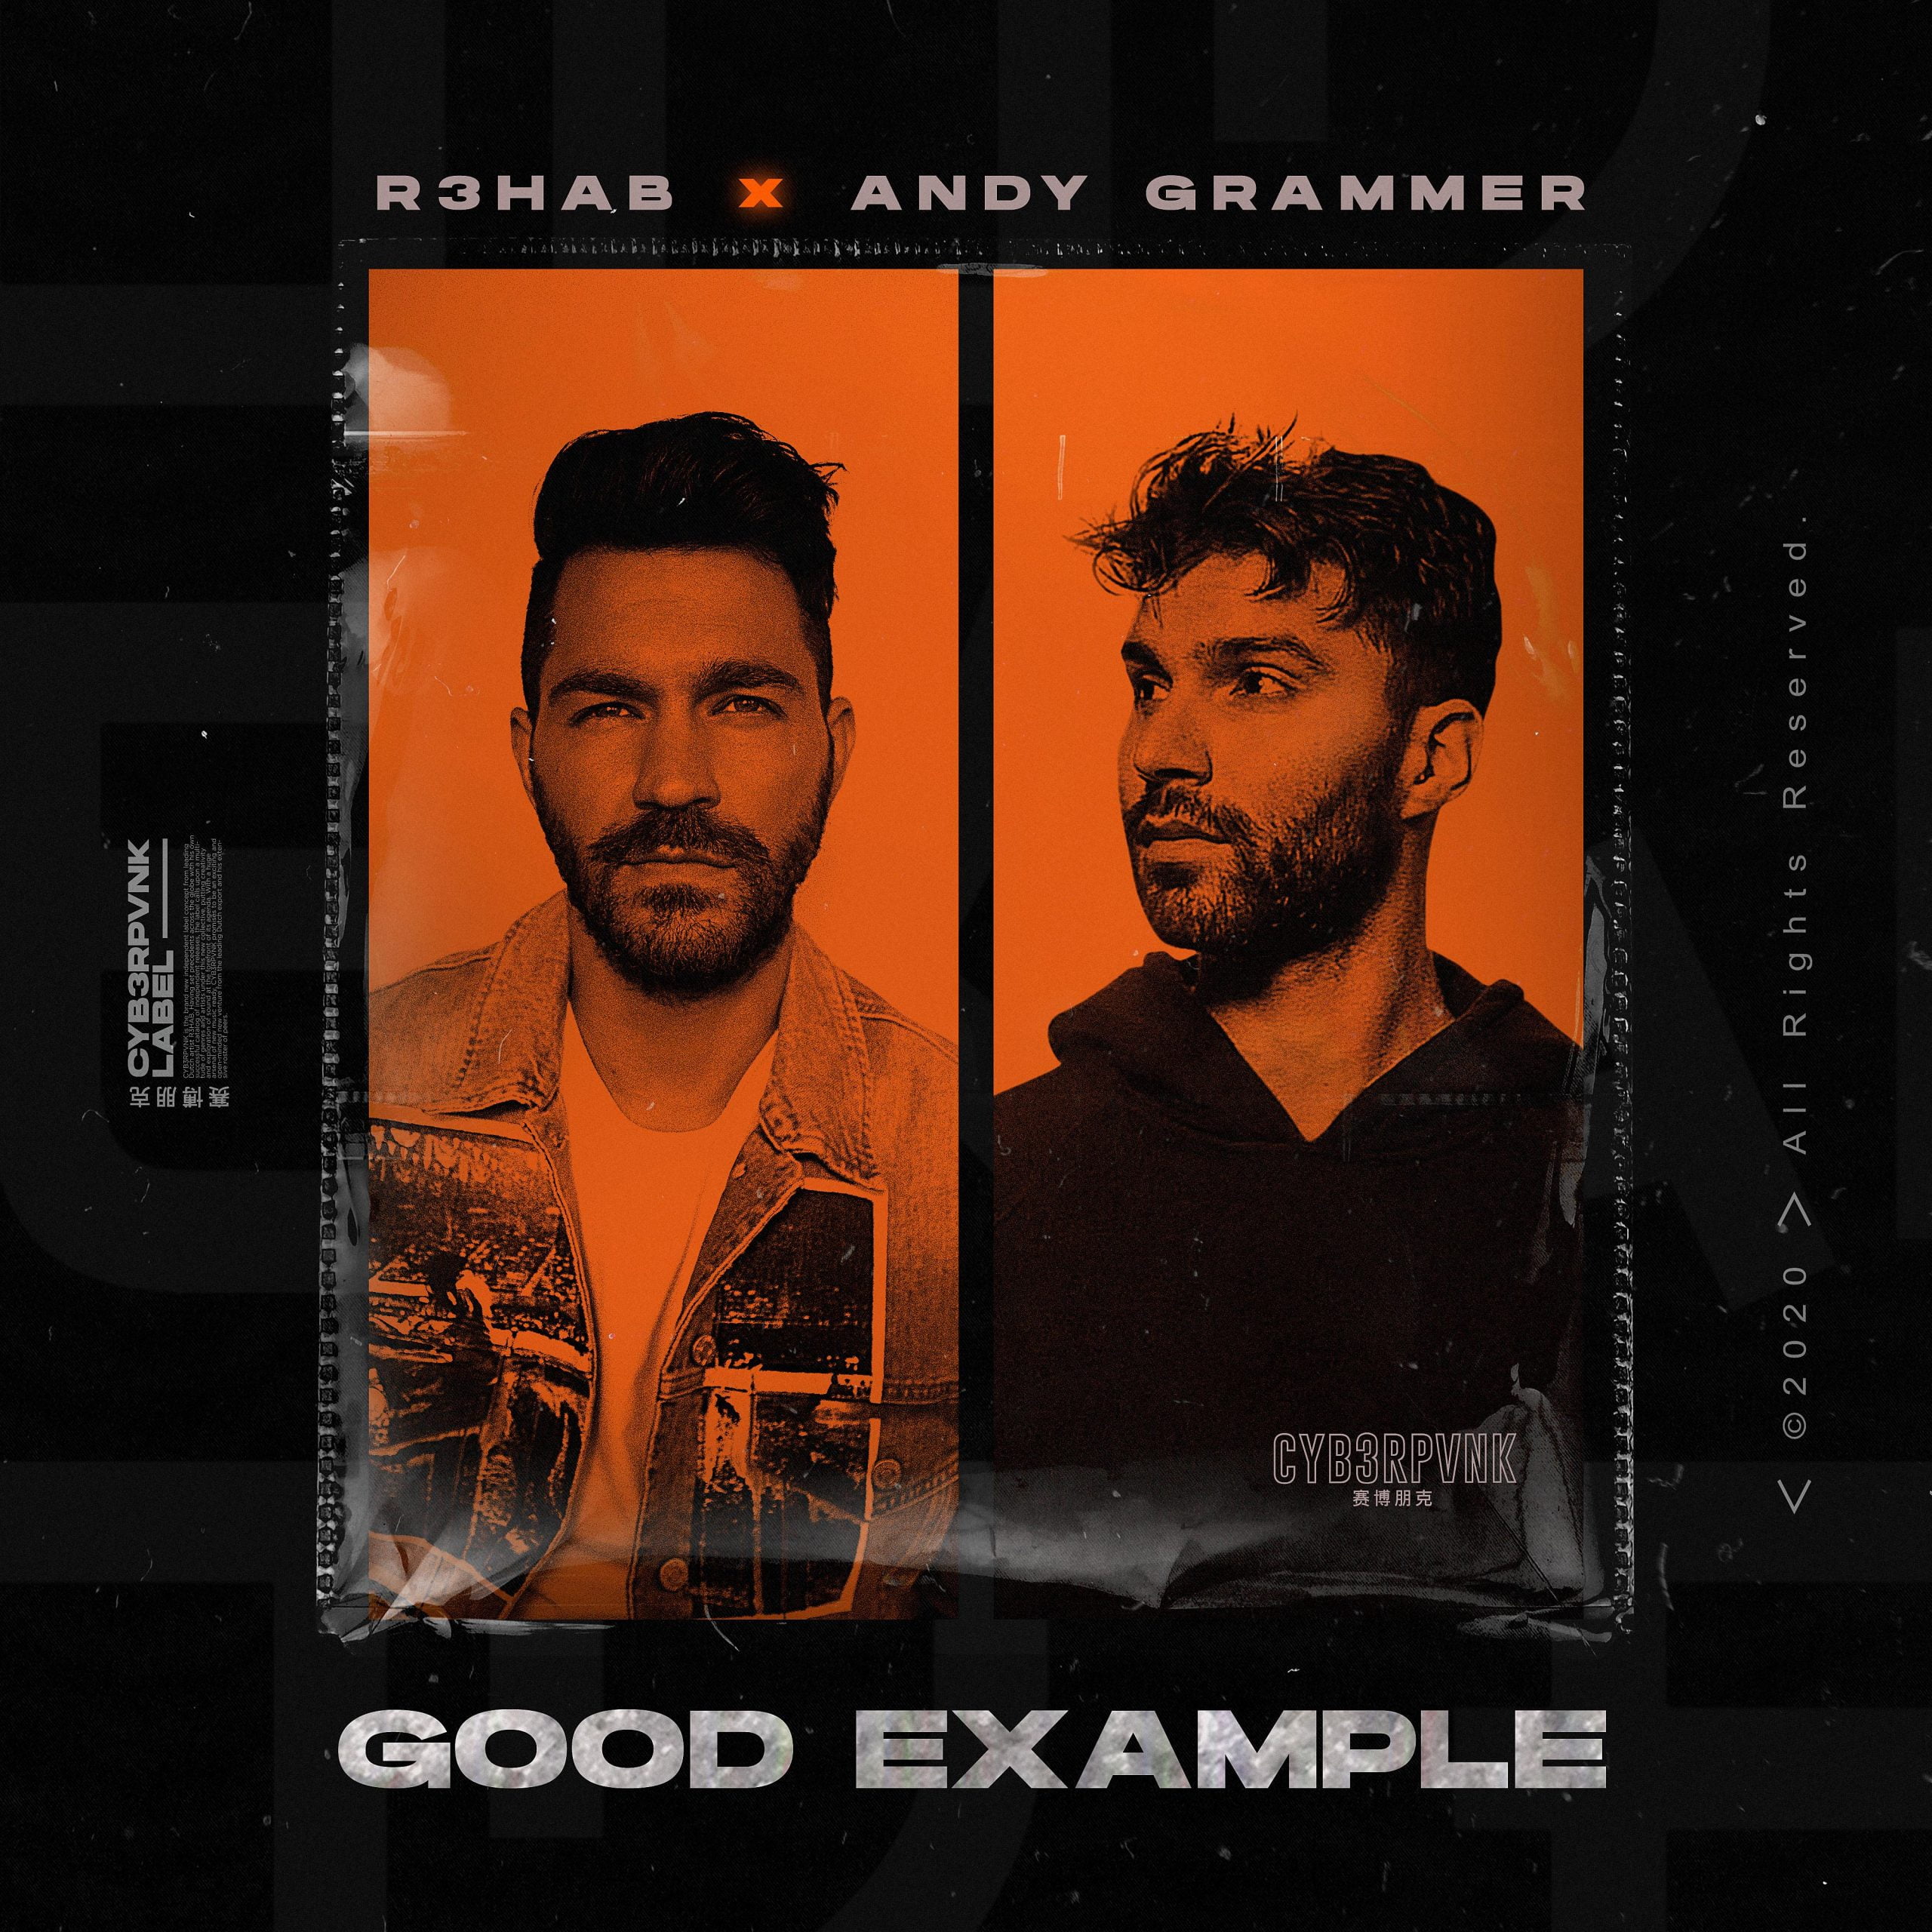 R3HAB & Andy Grammer Good Example cover artwork